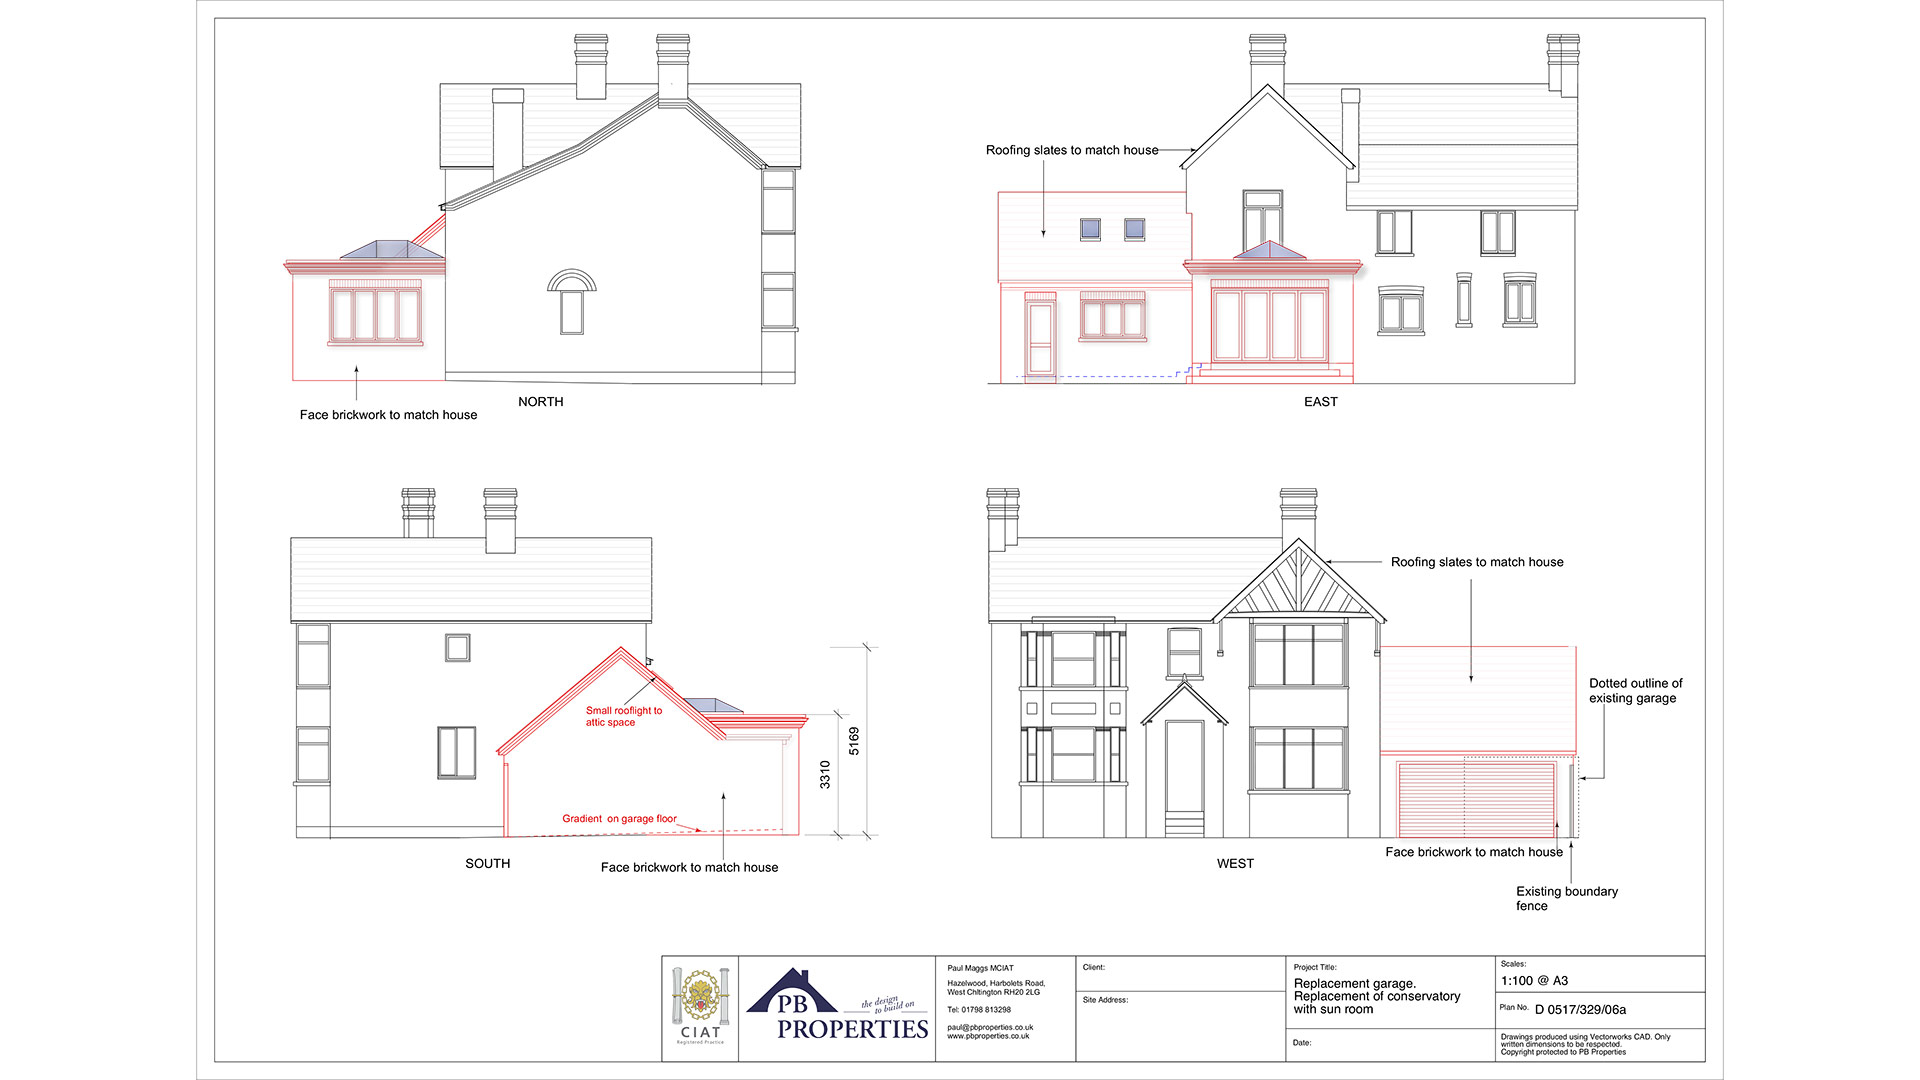 Planning Application for a Conservatory with Sun Room